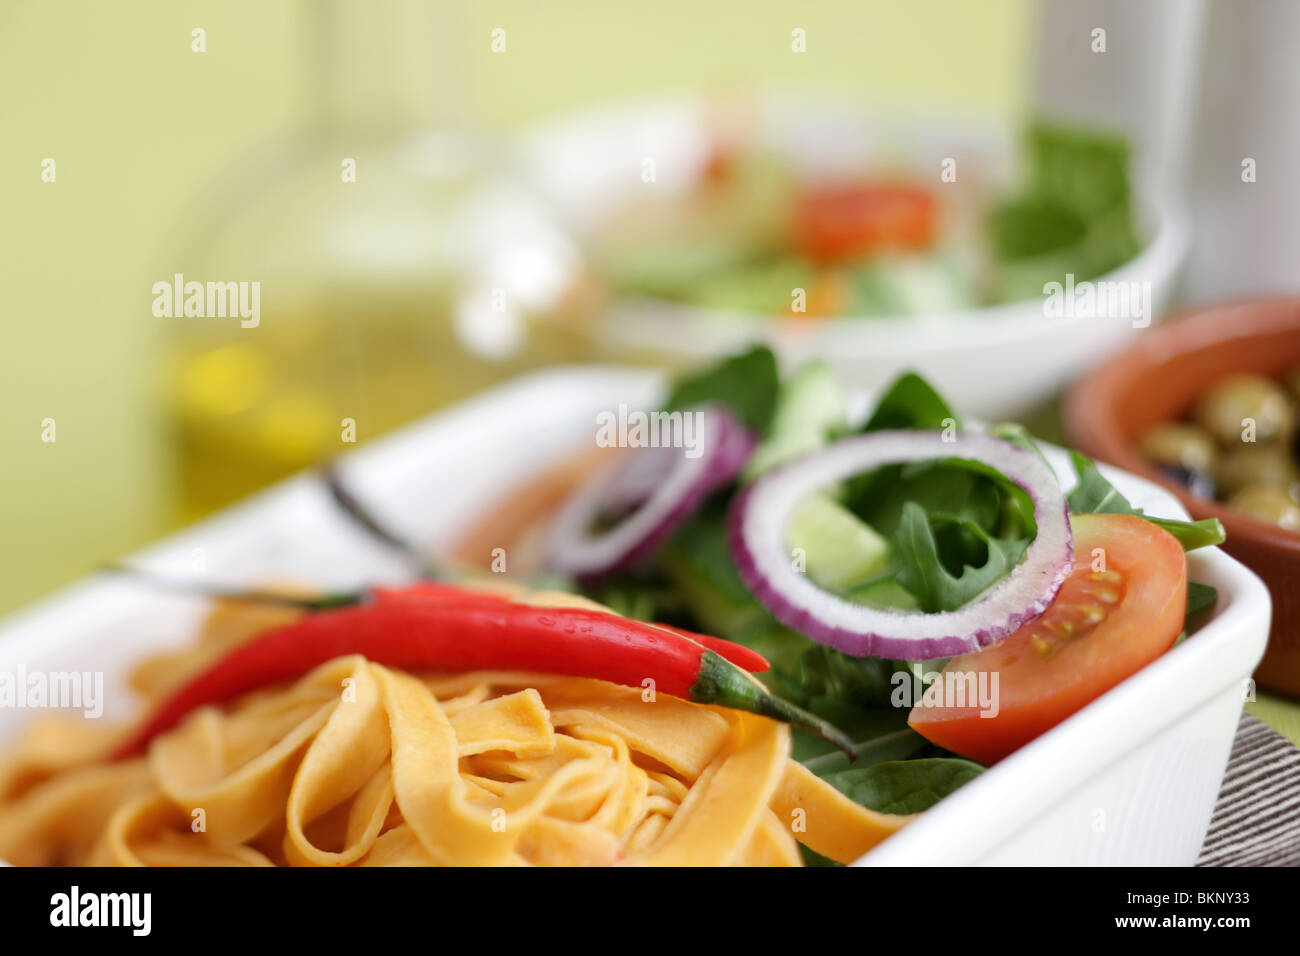 Authentic Italian Style Colourful Red Pepper and Chilli Tagliatelle Pasta Meal With A Salad And No People On A Table Top Setting Stock Photo